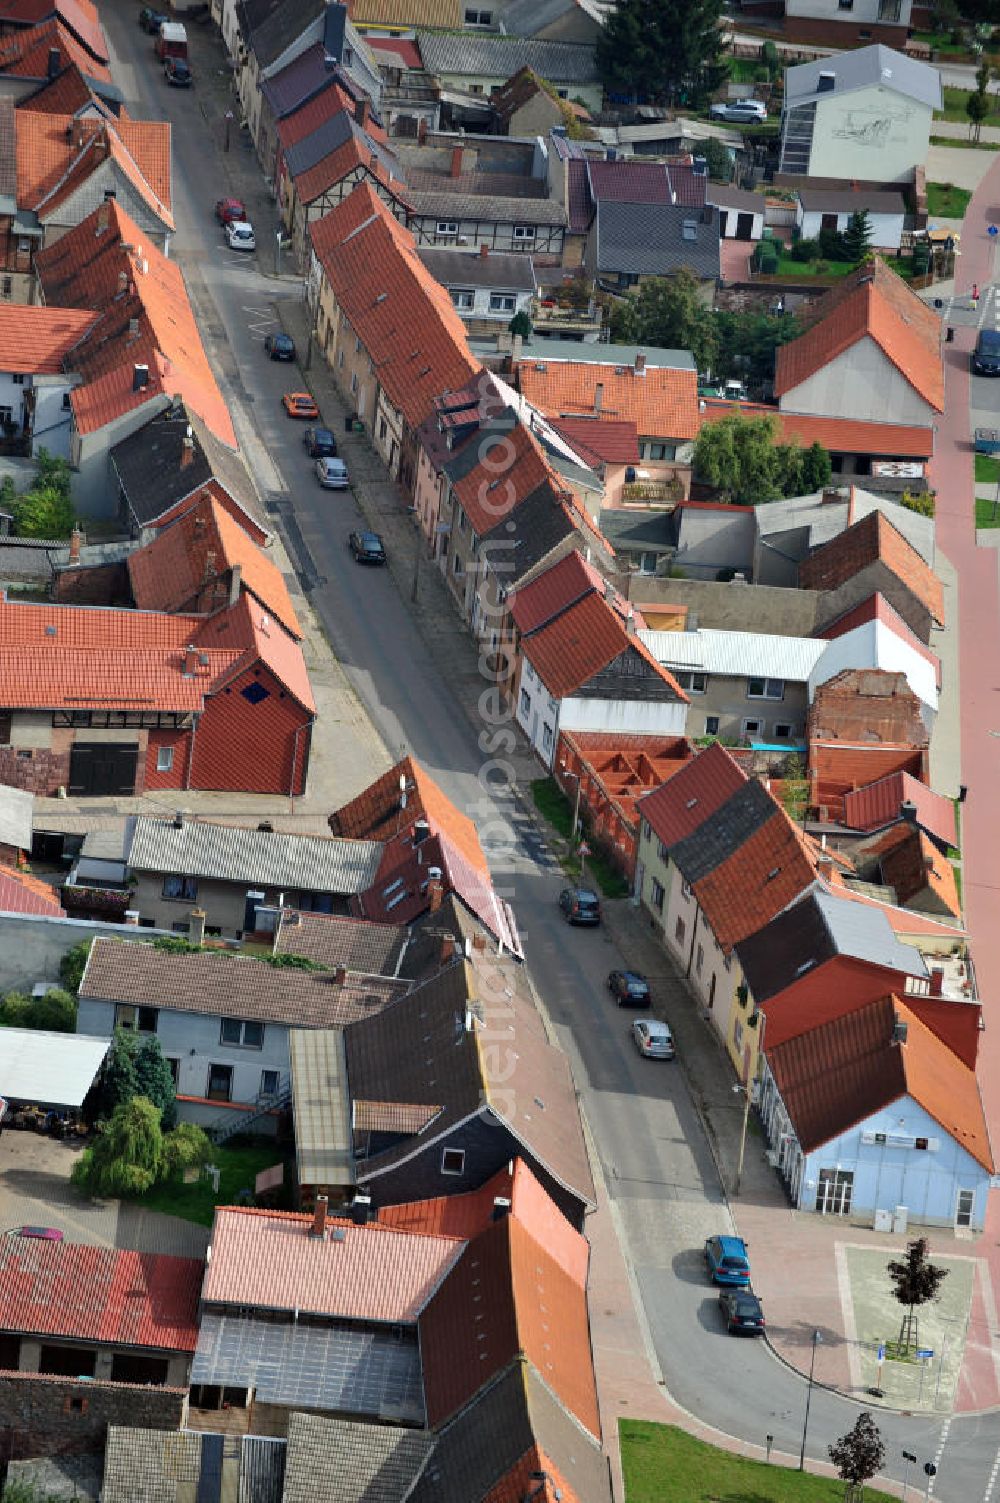 Aerial image Kelbra - Housing estate of half-timbered houses in the inner city of Kelbra in Saxony-Anhalt. Kelba is situated in the Kyffhäuser mountains and is a popular place of departure for trips to the resin